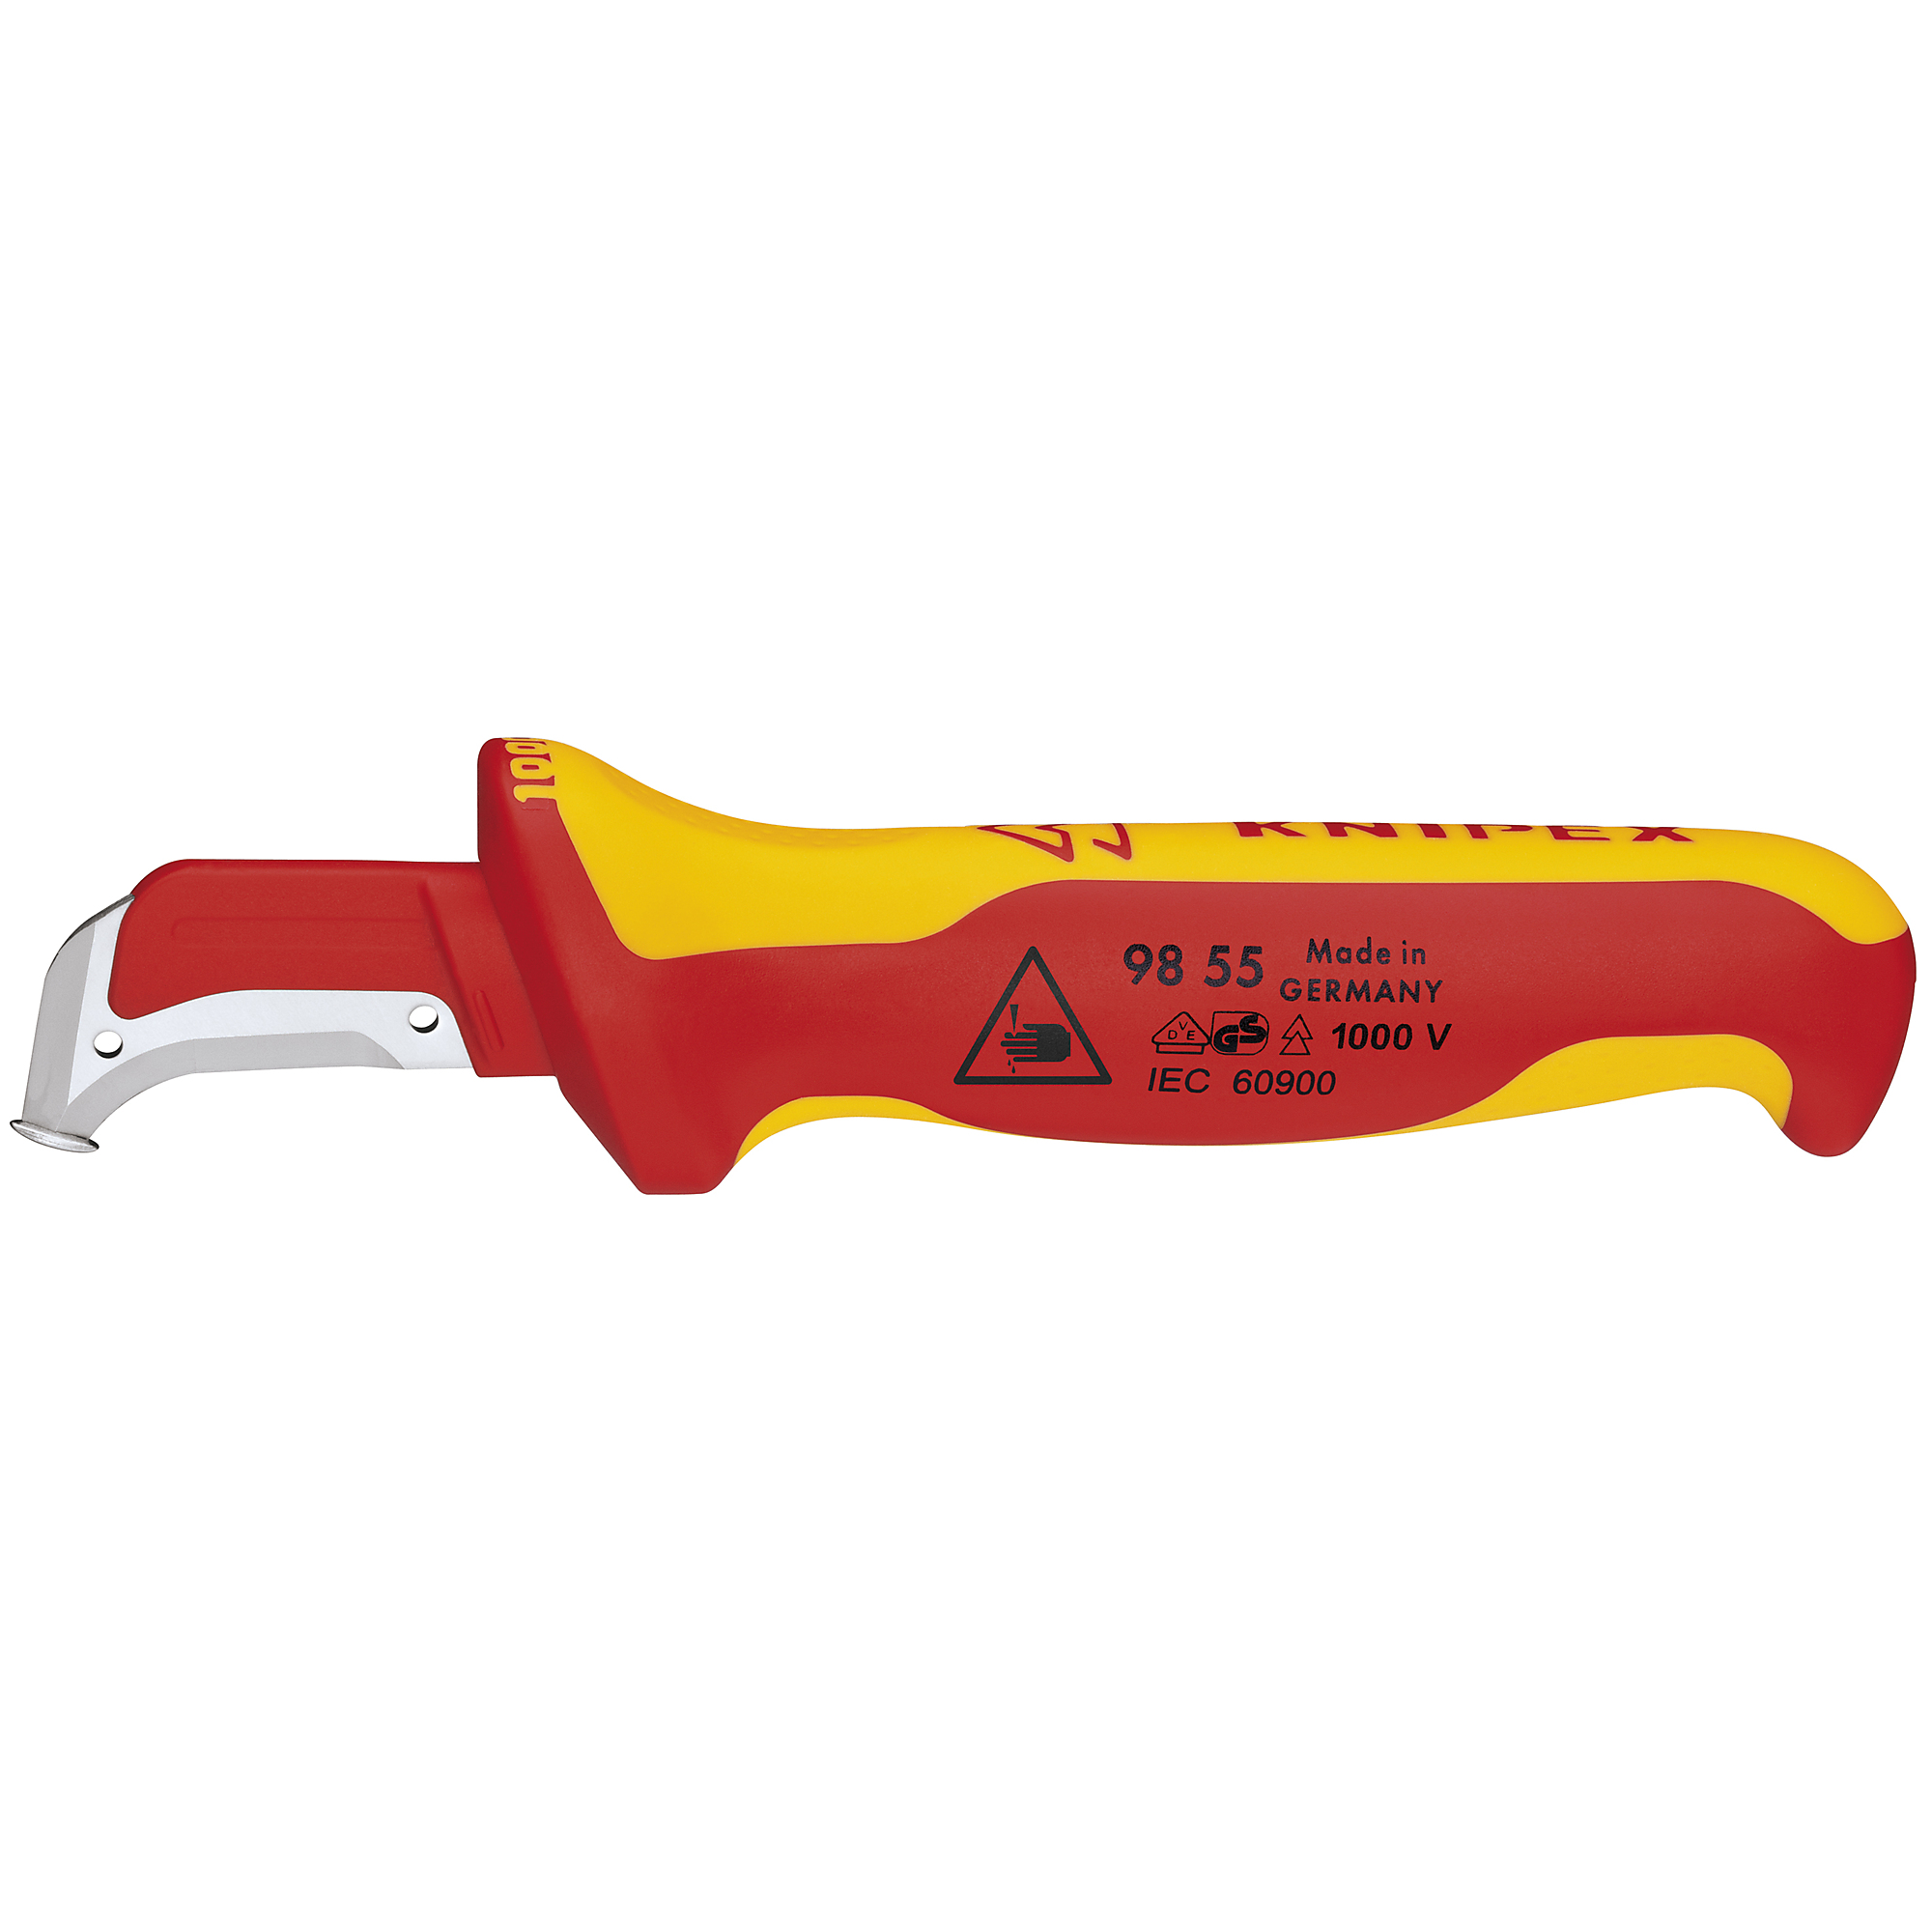 KNIPEX, Dismantling Knife-1000V Insulated, VDE, Bulk, 7Inch, Pieces (qty.) 1 Material Steel, Model 98 55